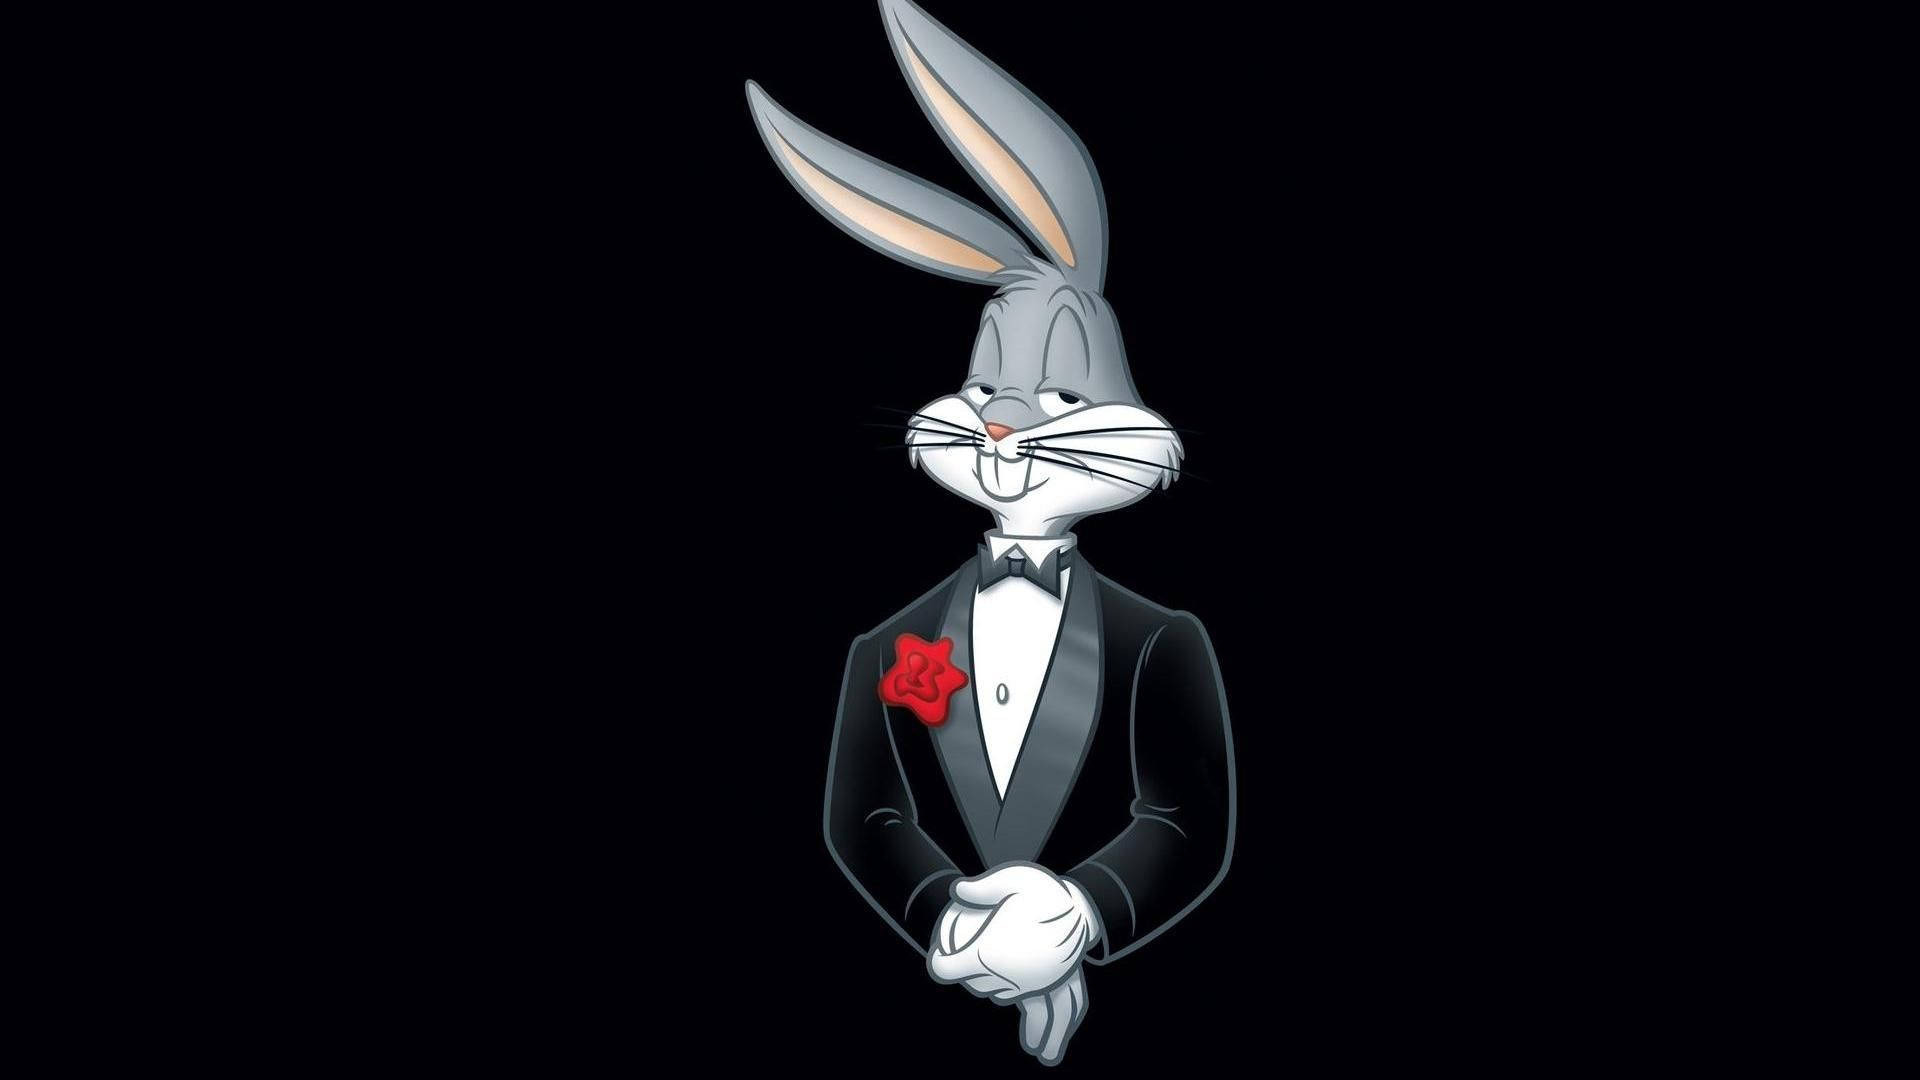 Bugs Bunny 1920X1080 Wallpaper and Background Image